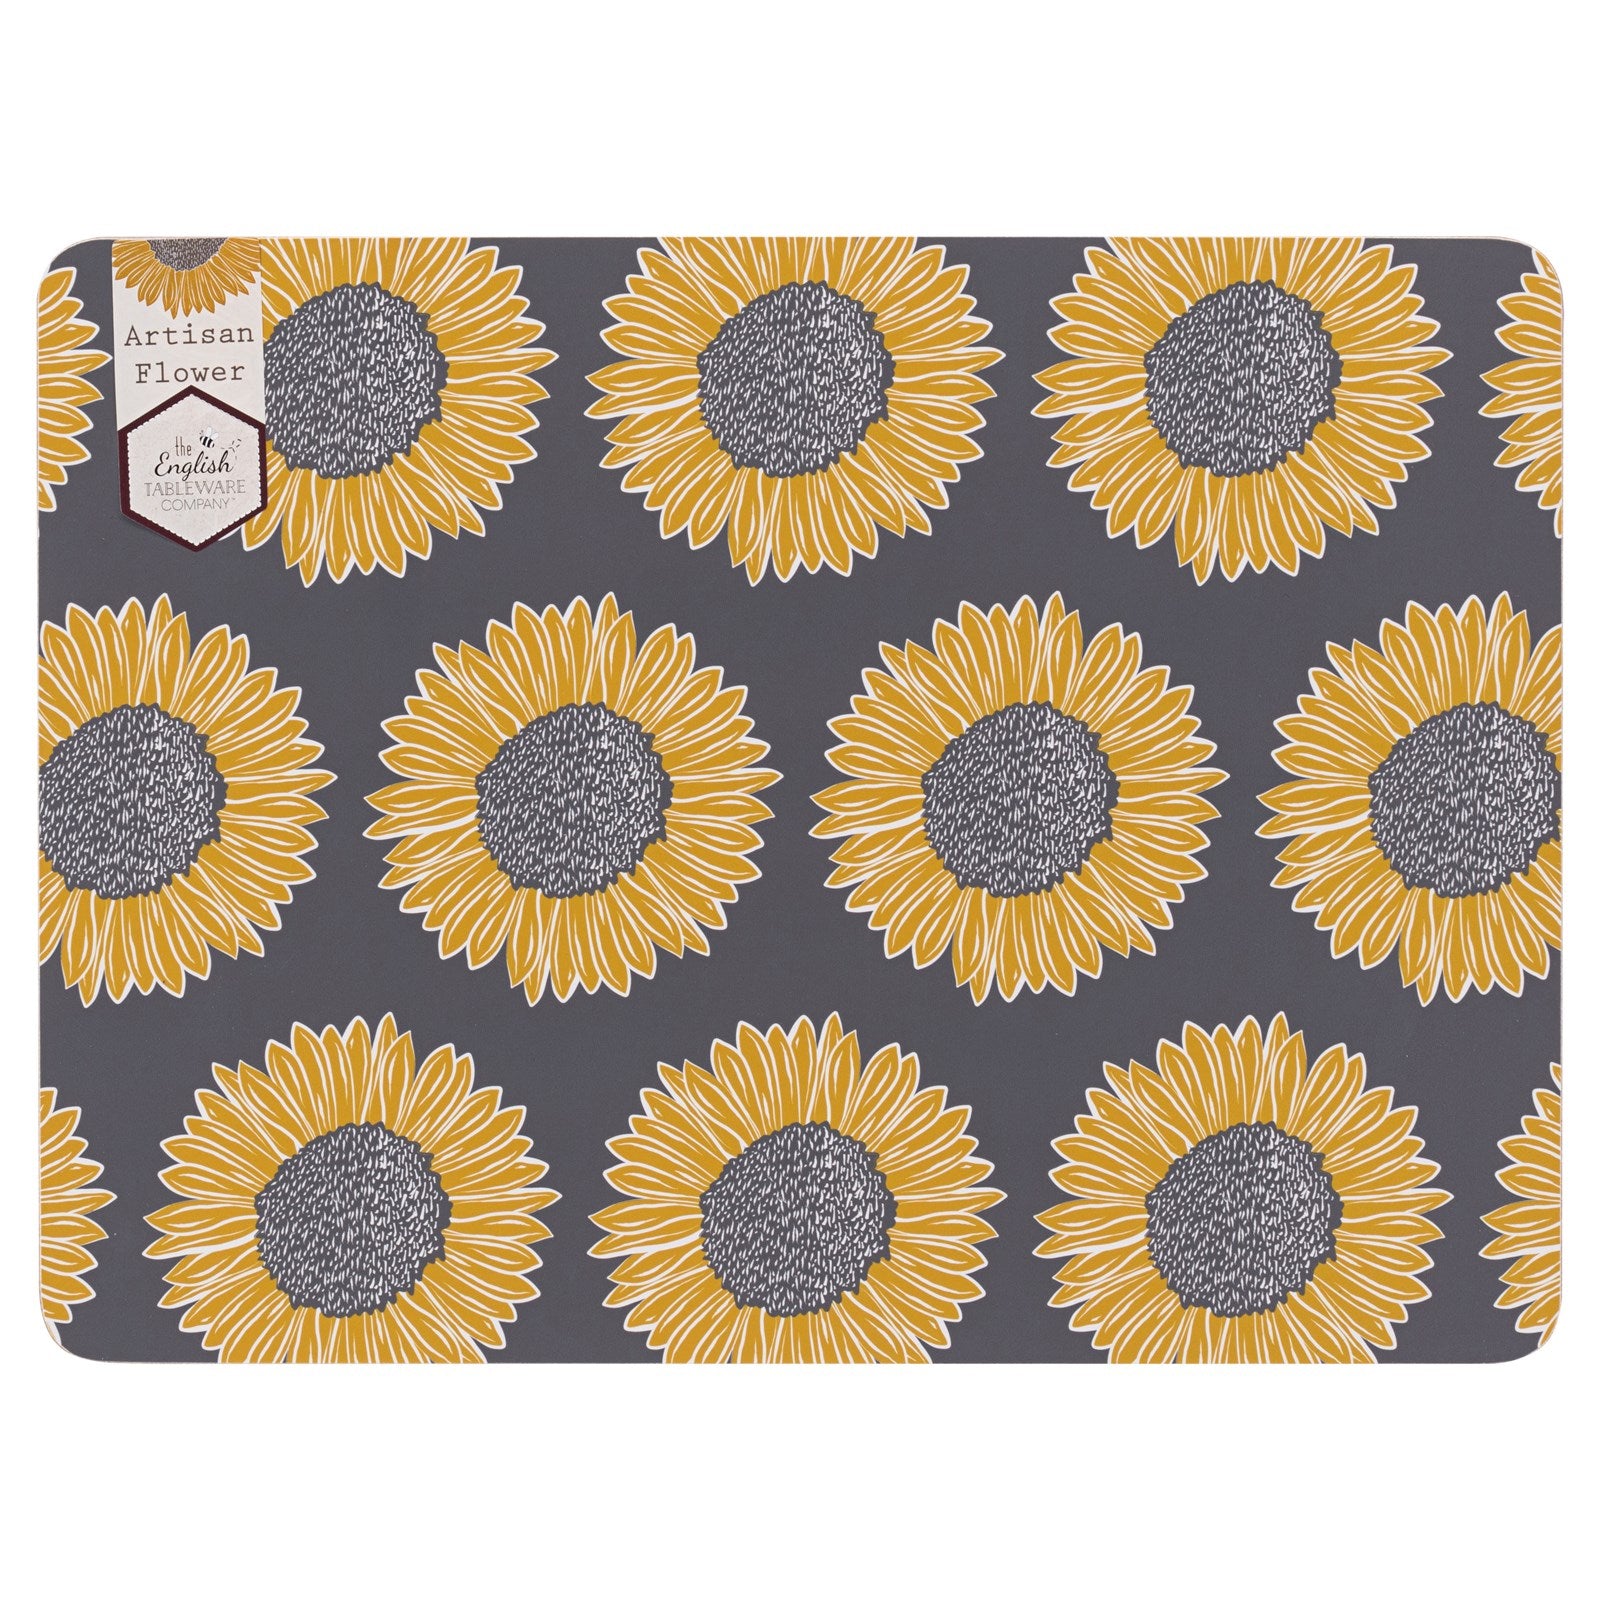 The English Tableware Company Artisan Flower 4pk Placemats